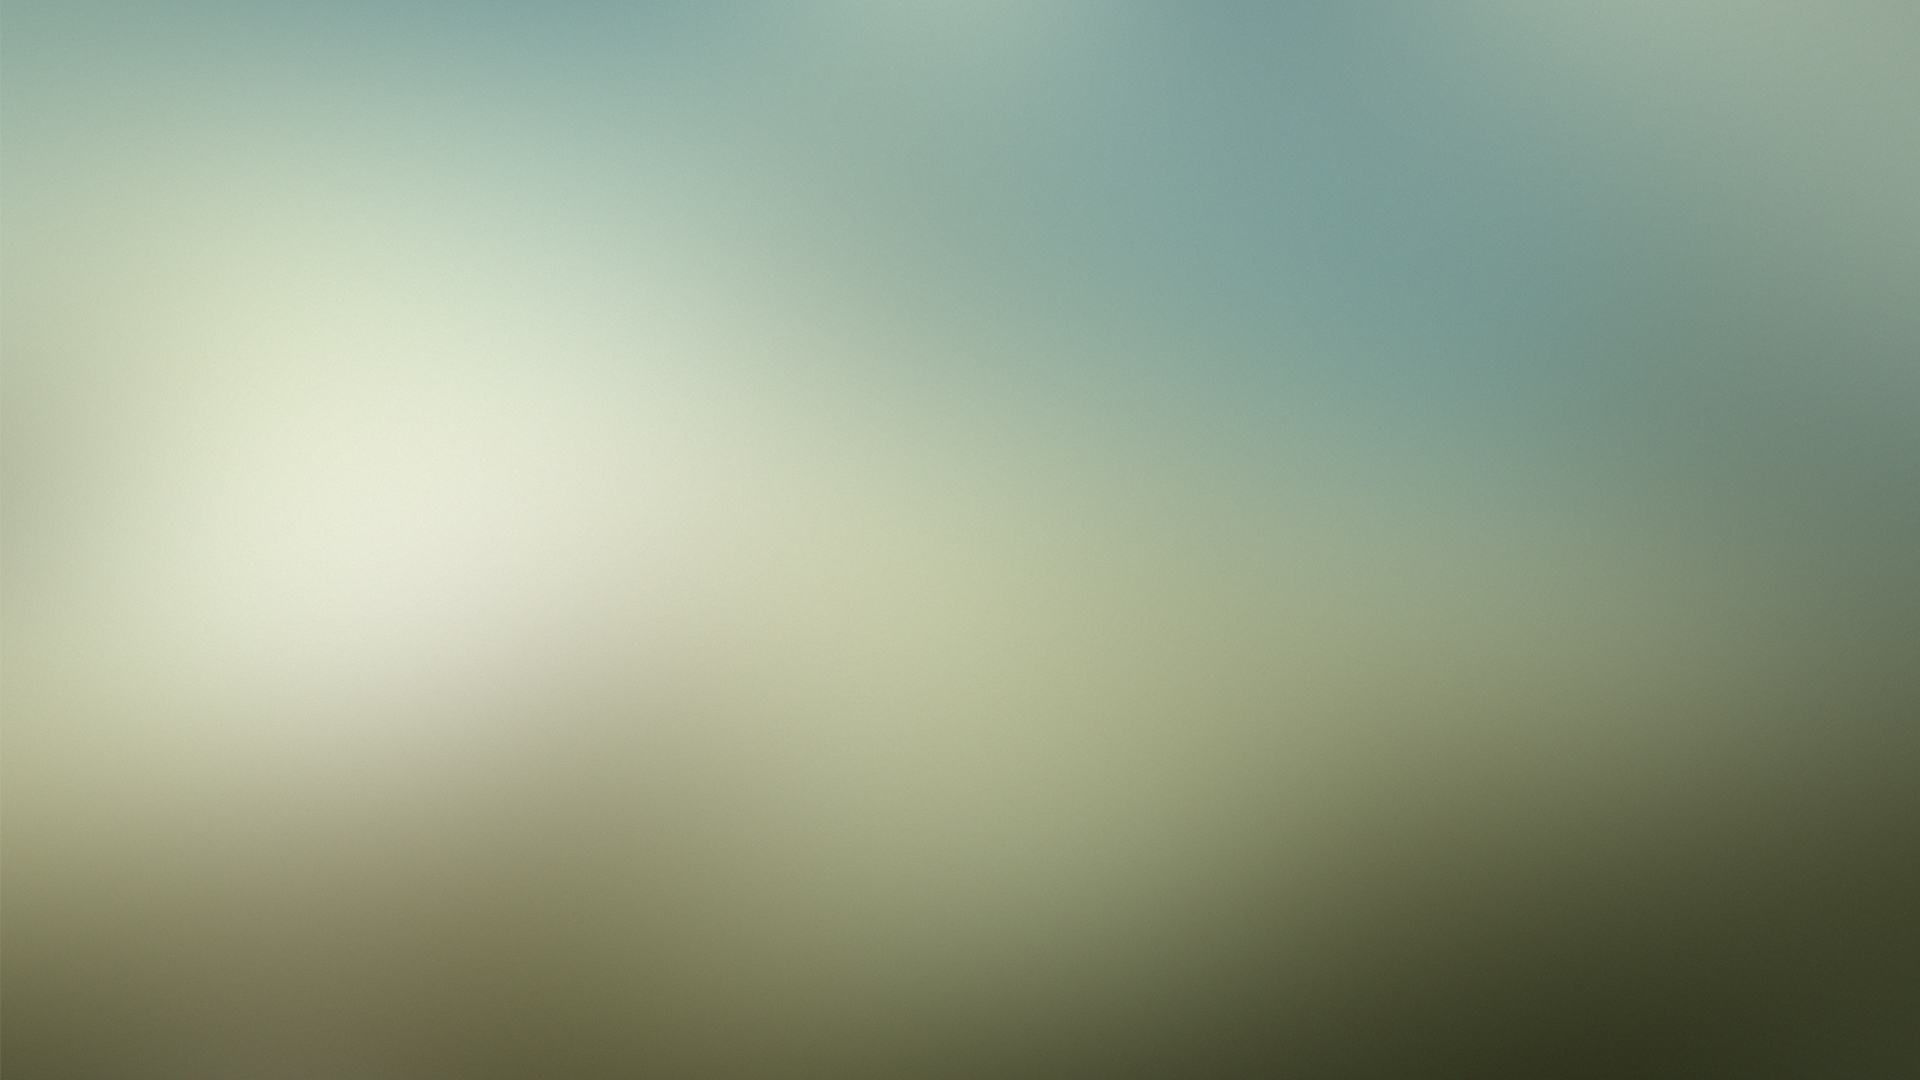 gaussian blur - HD Wallpaper View, Resize and Free Download /  